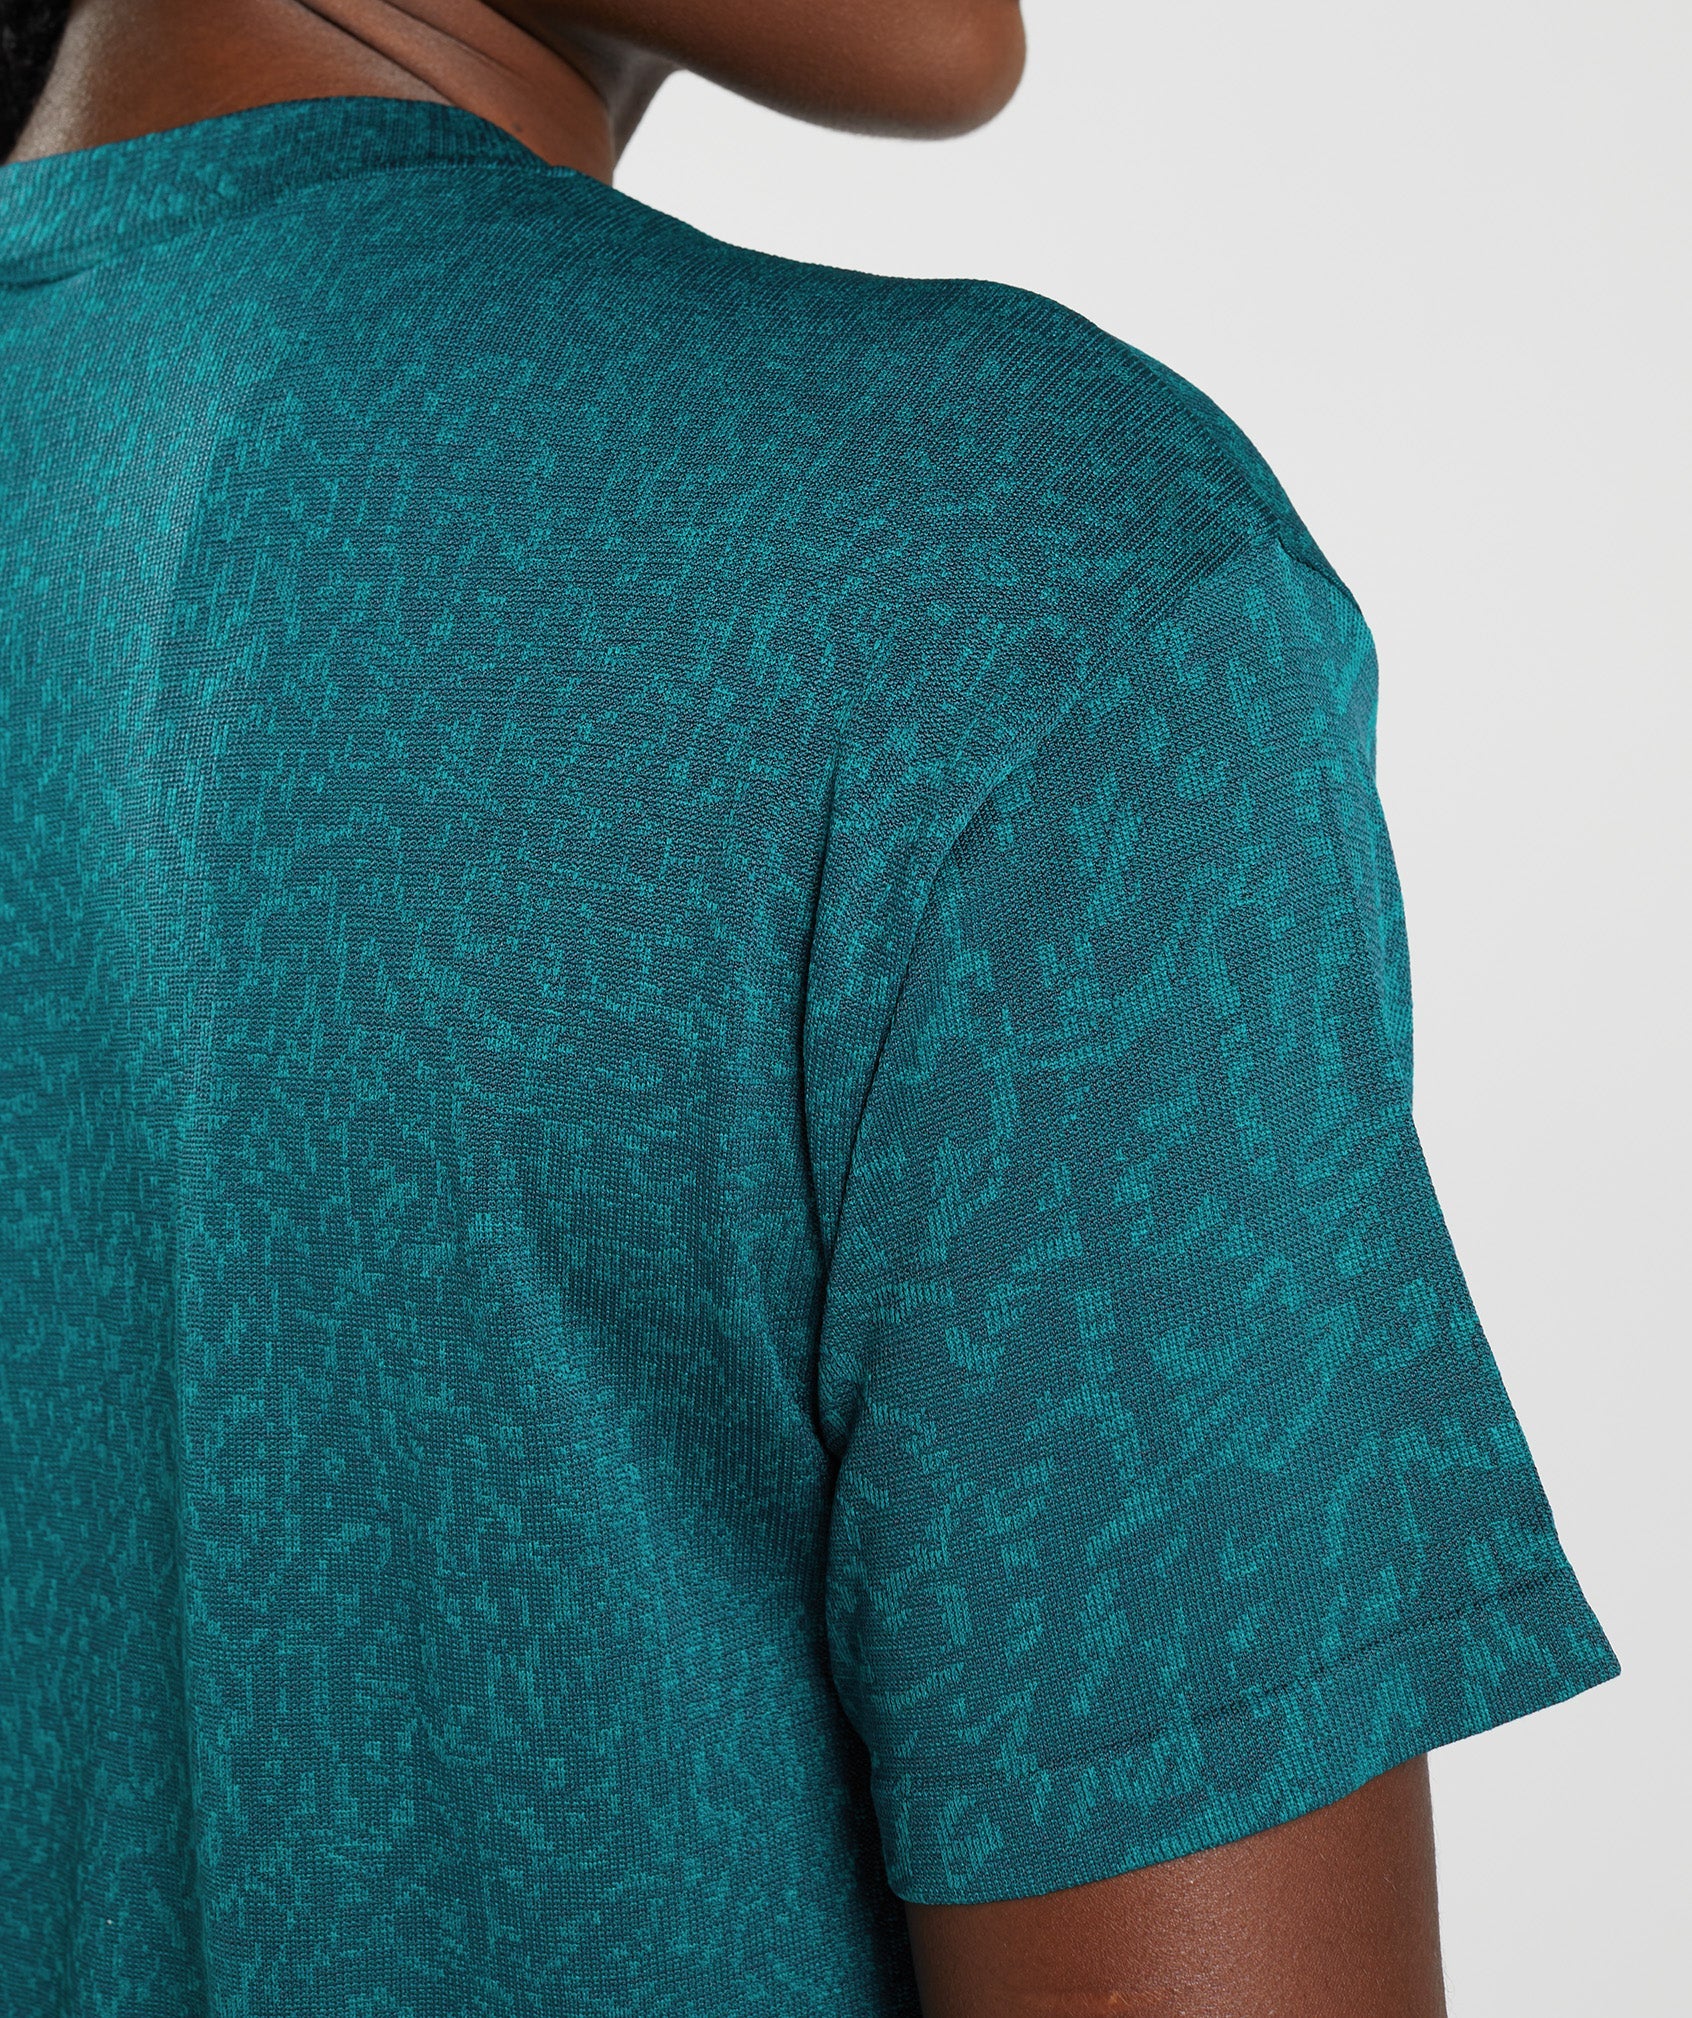 Adapt Animal Seamless T-Shirt in Reef | Winter Teal - view 6